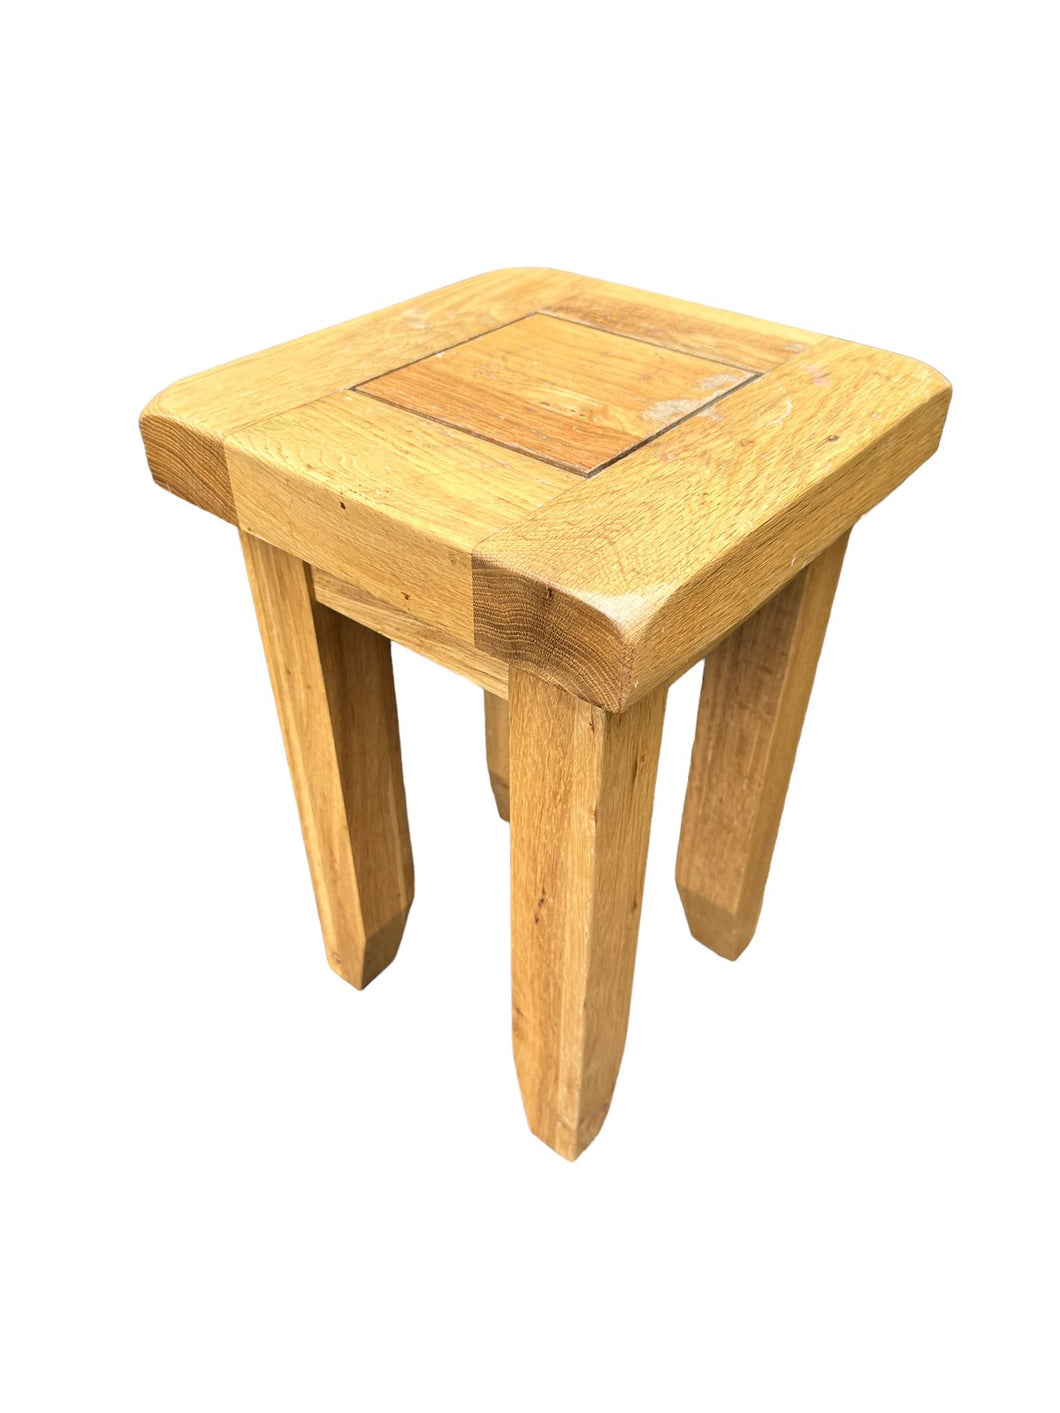 Solid Oak Small Square Side Table Lamp Table